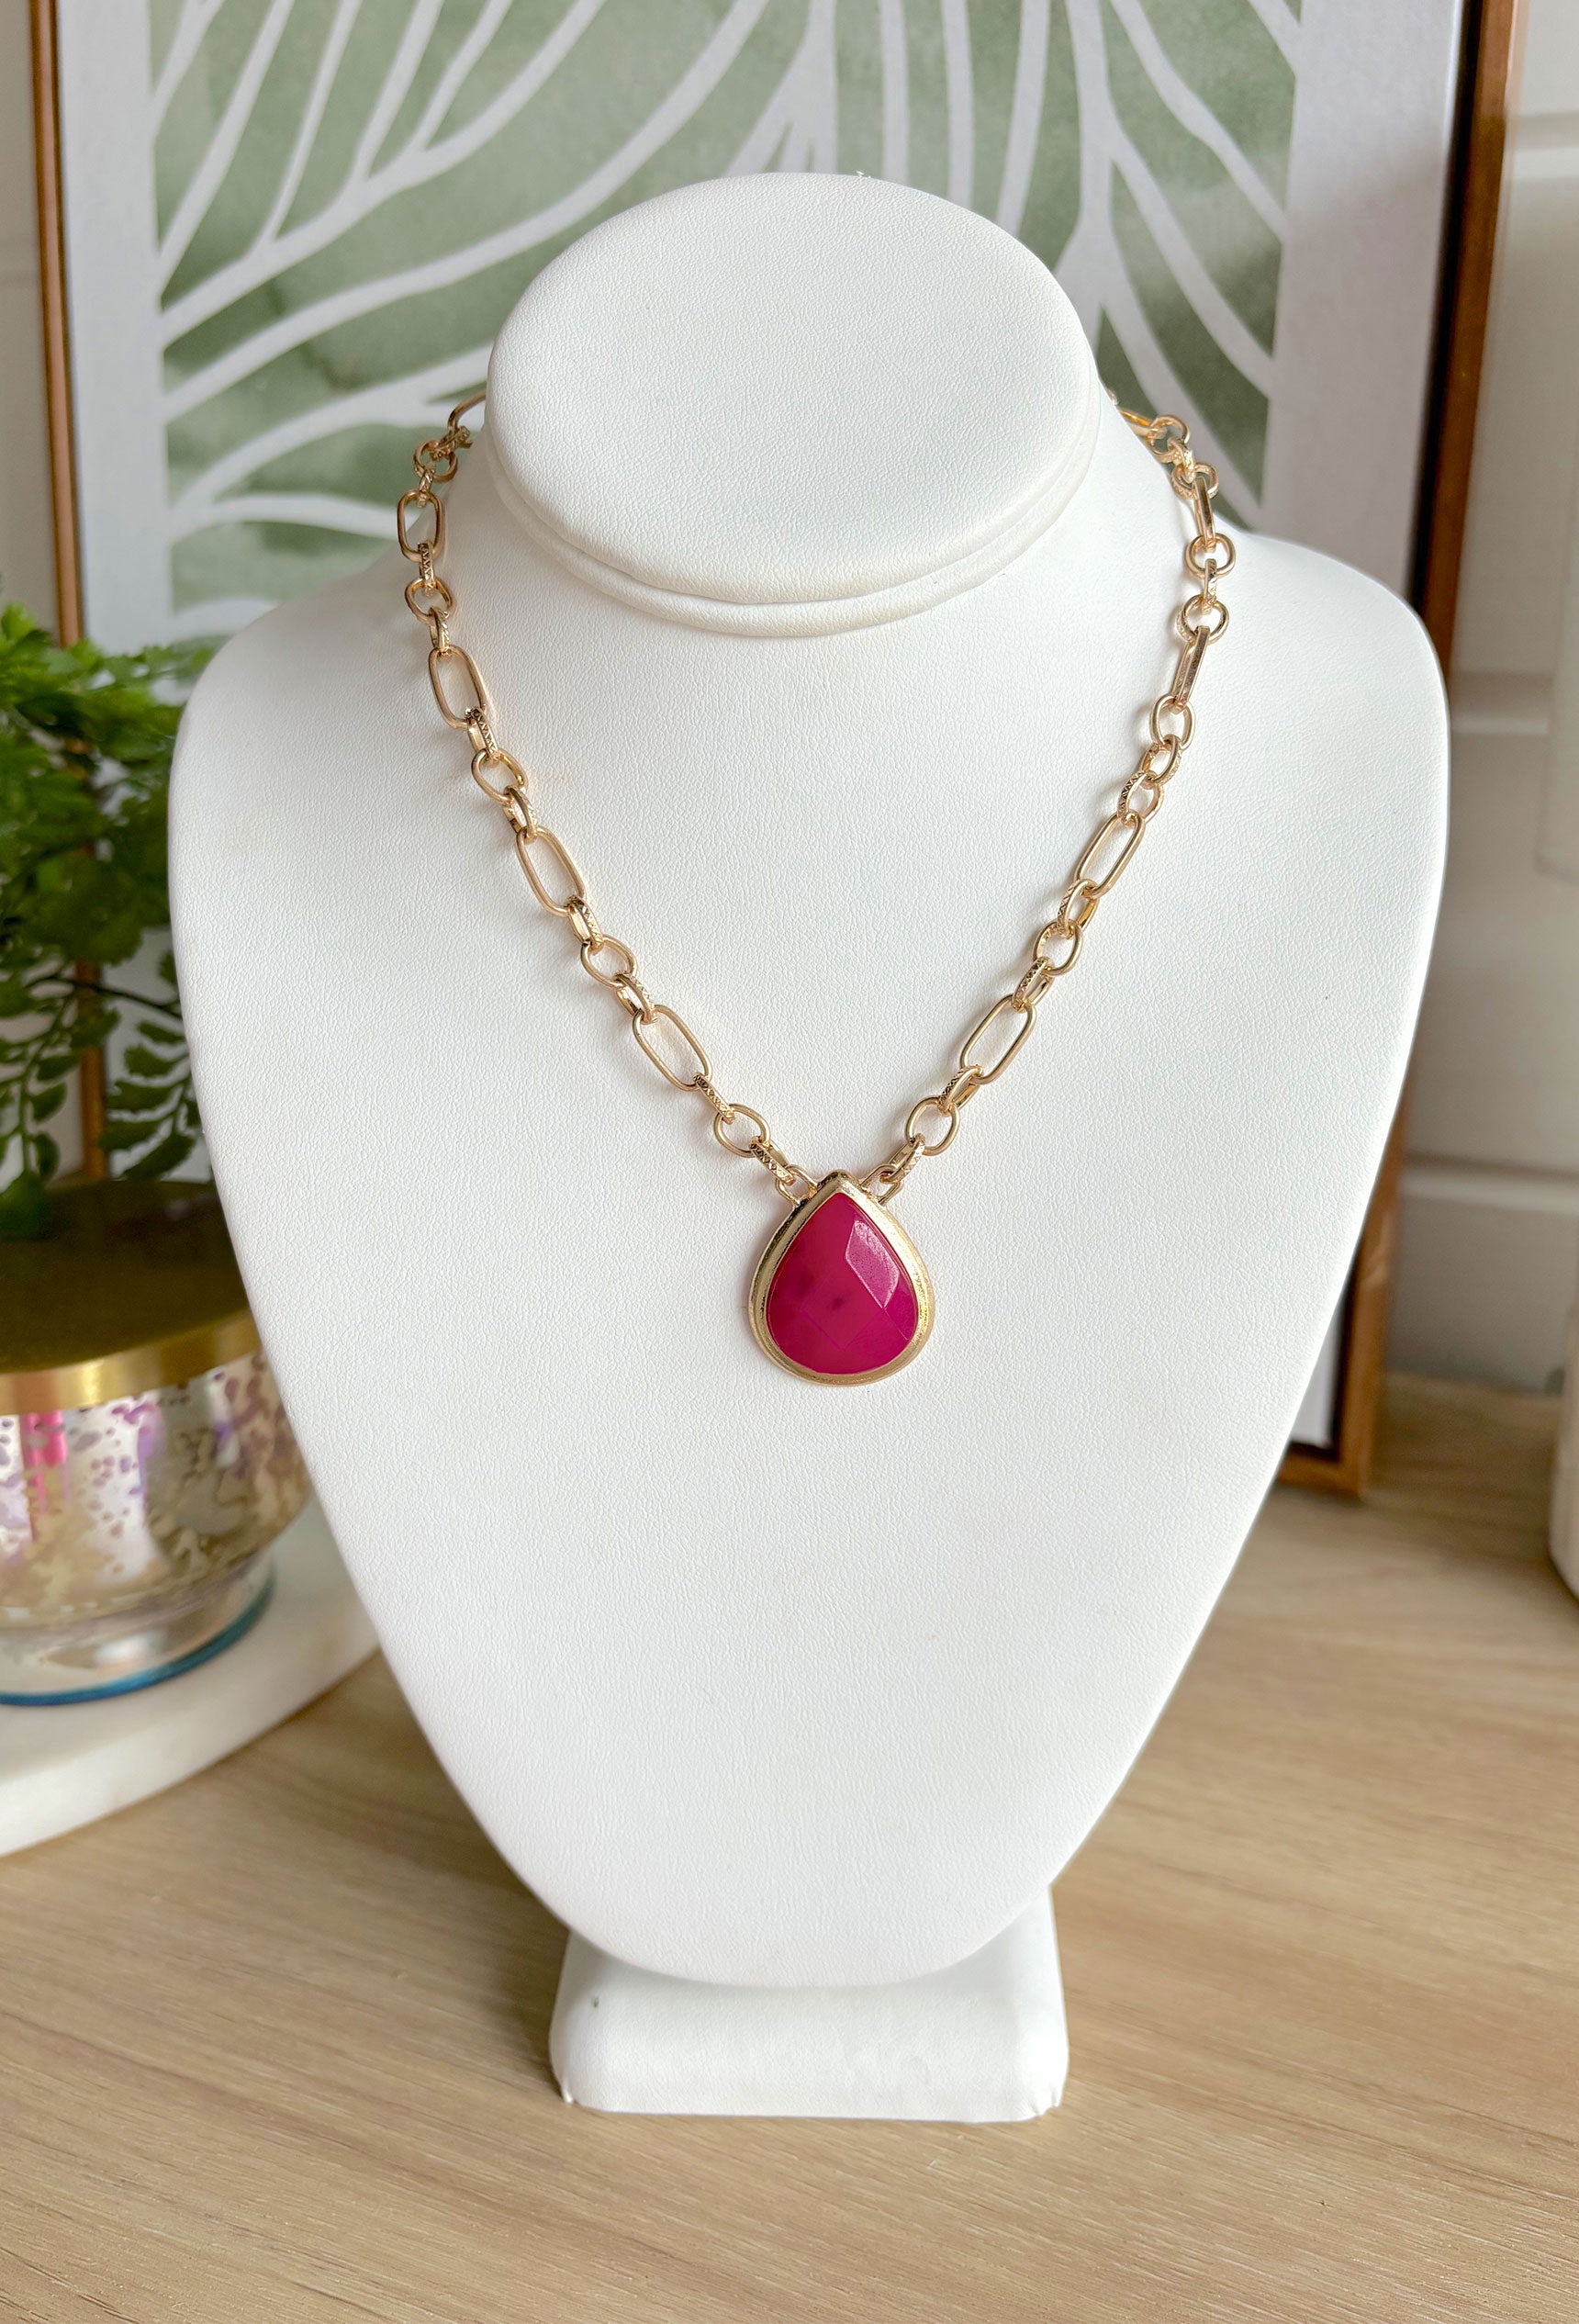 Treat You Better Necklace in Pink, gold chain link necklace with hot pink teardrop pendant